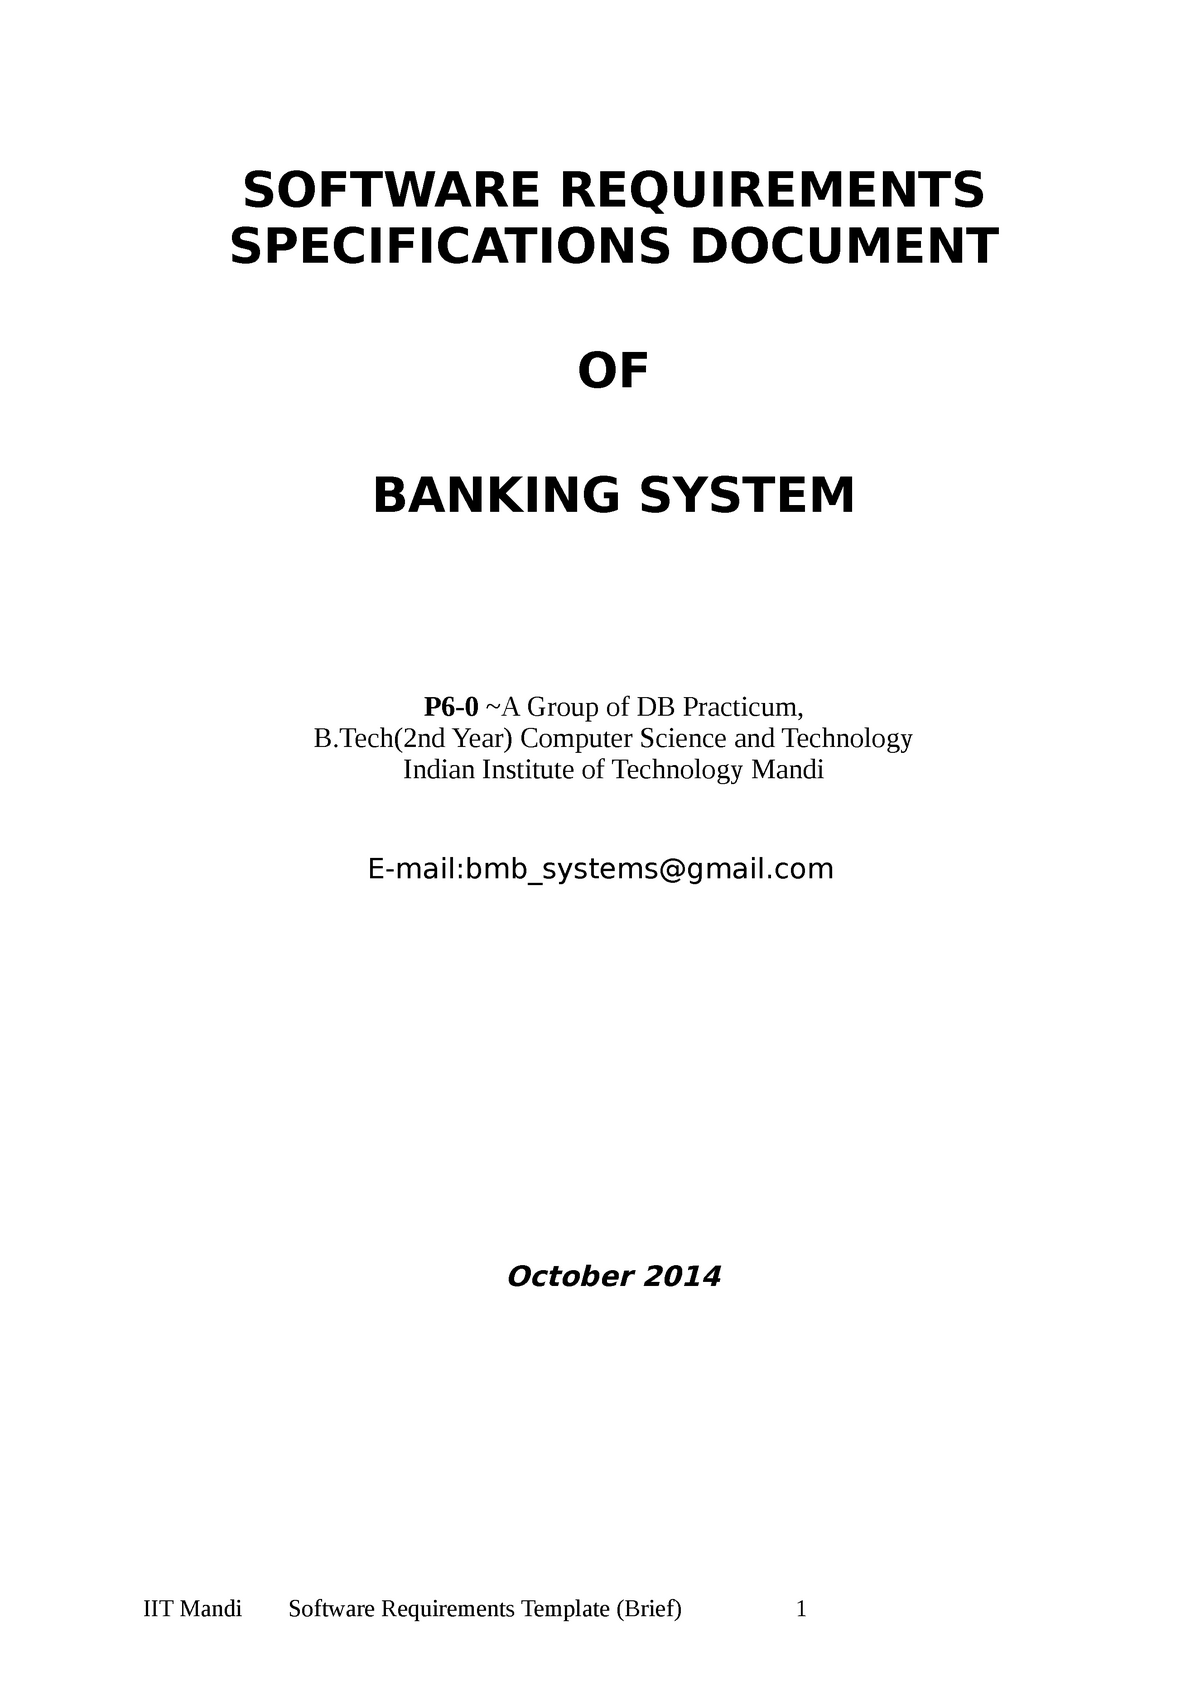 srs for banking system